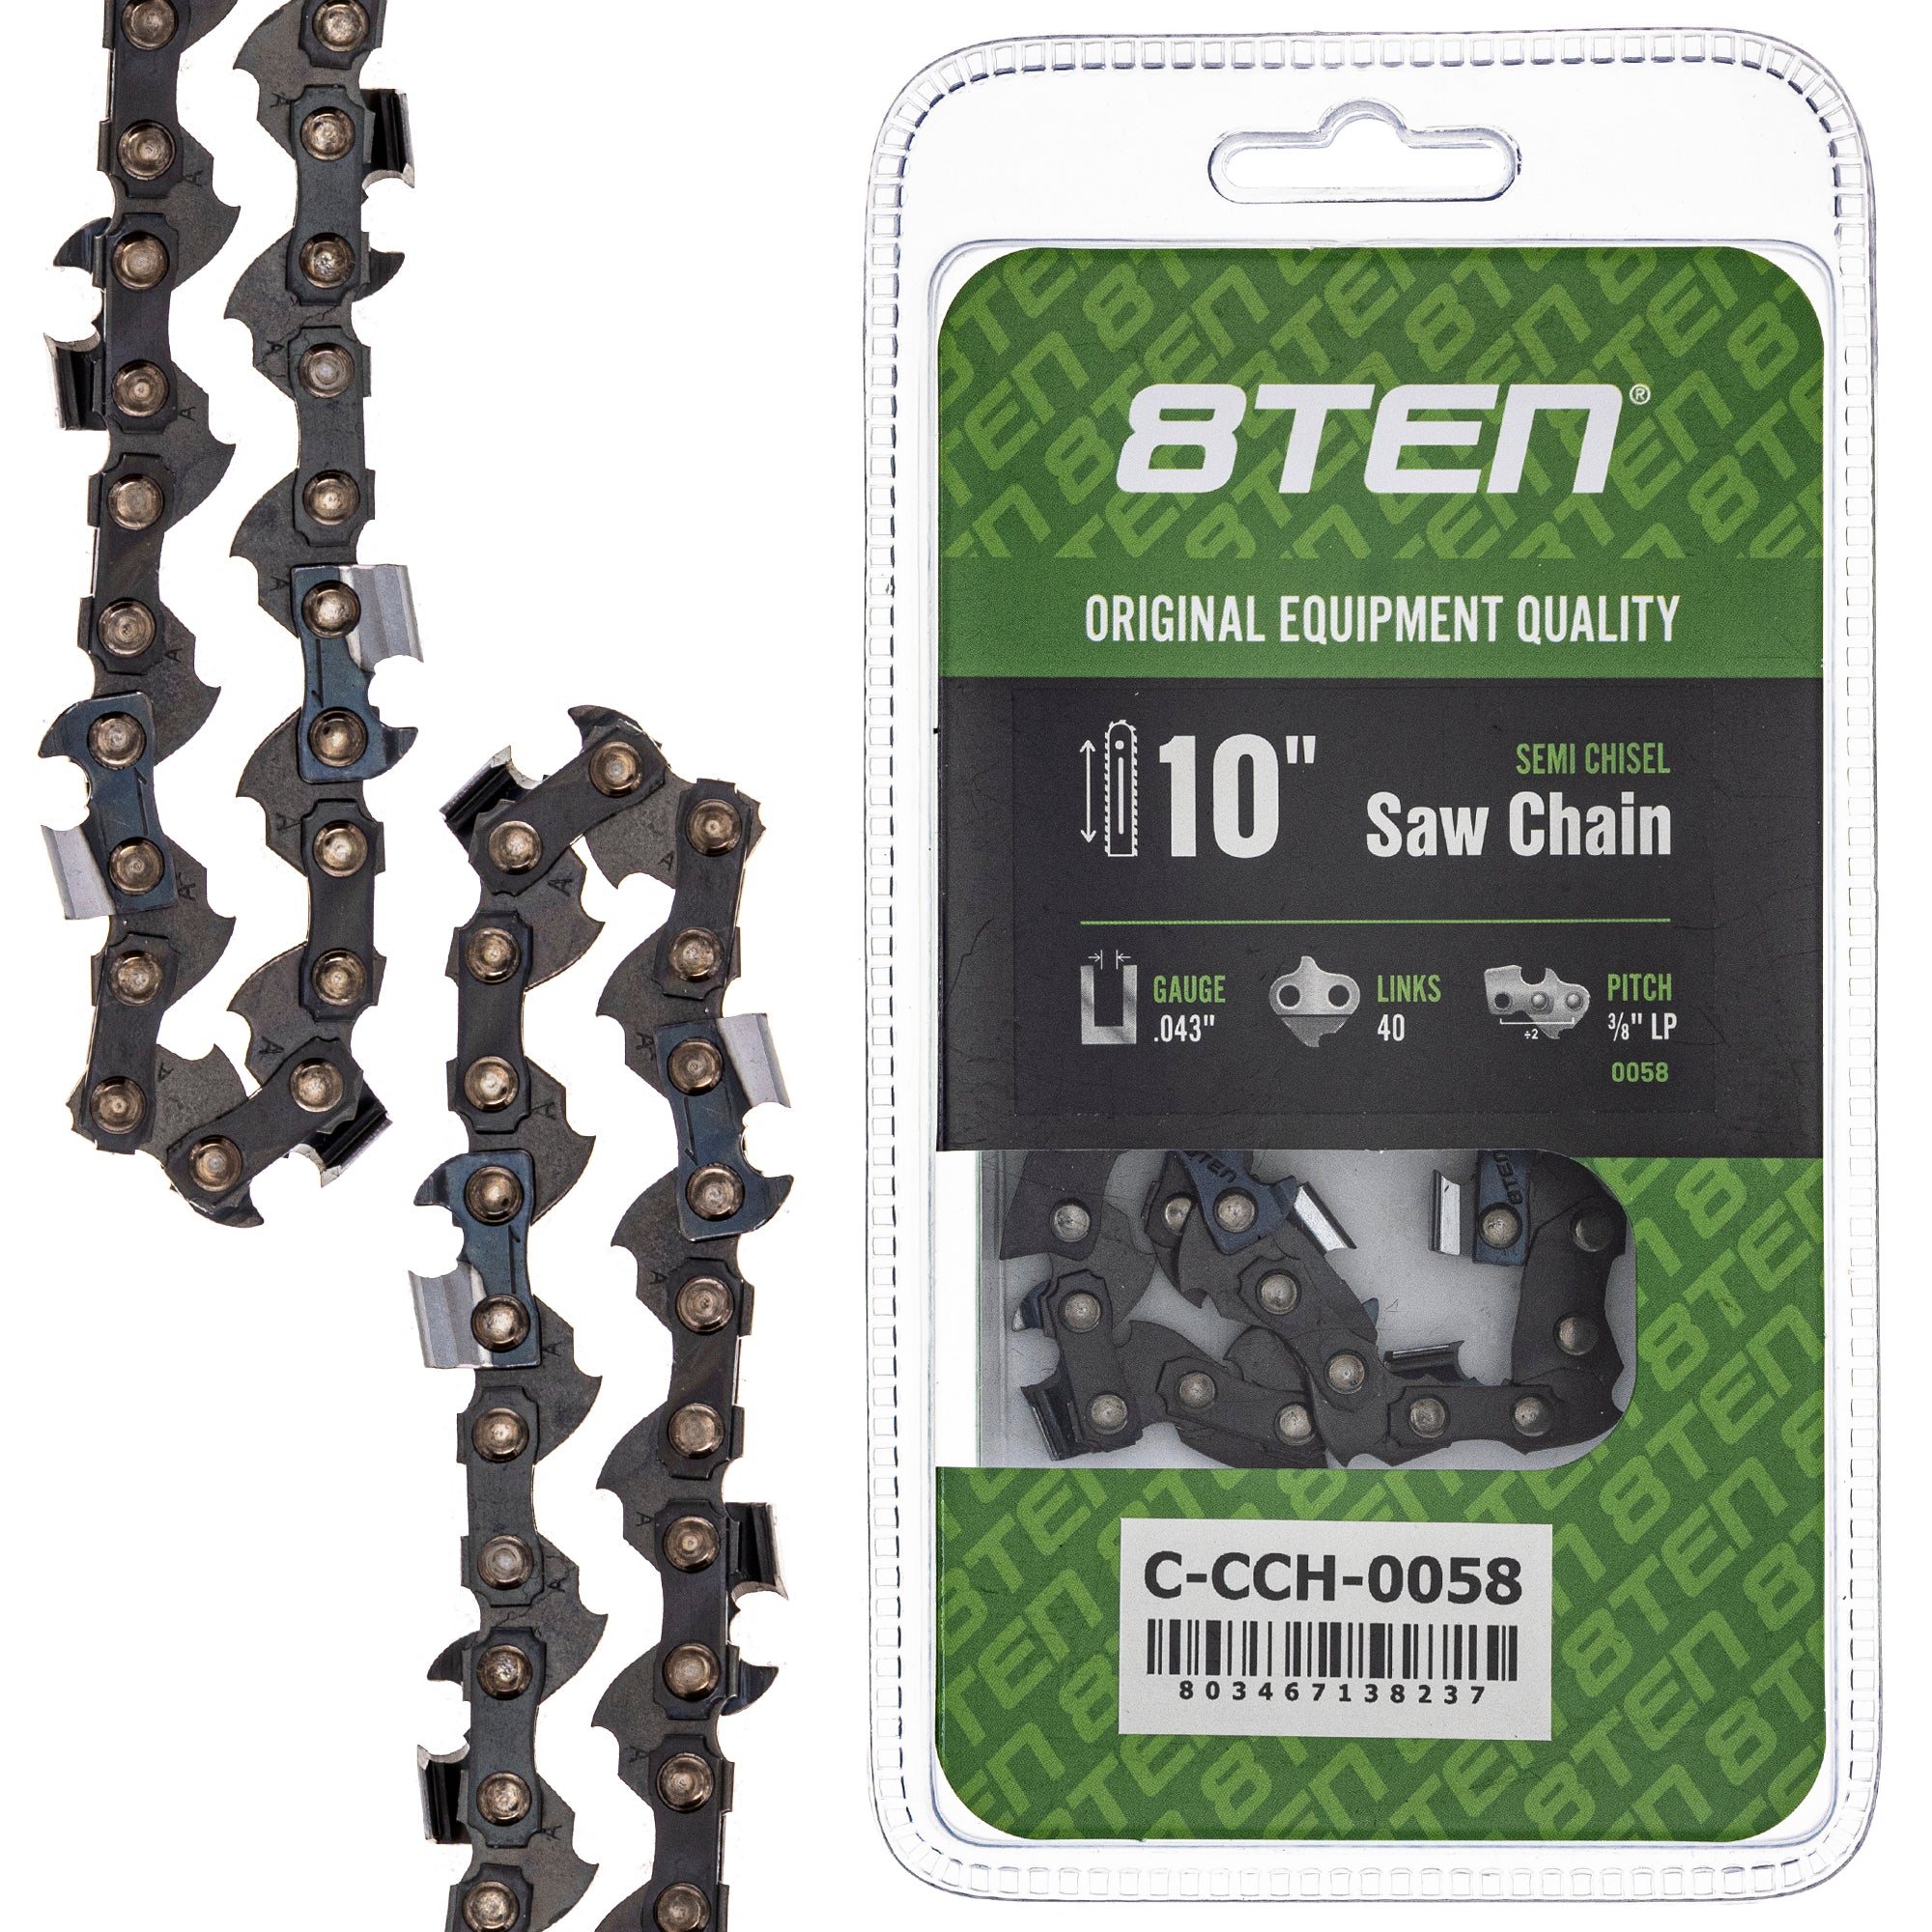 Chainsaw Chain 10 Inch .043 3/8 LP 40DL for zOTHER Oregon UT34010 TPS-270PF TPS-270 8TEN 810-CCC2270H